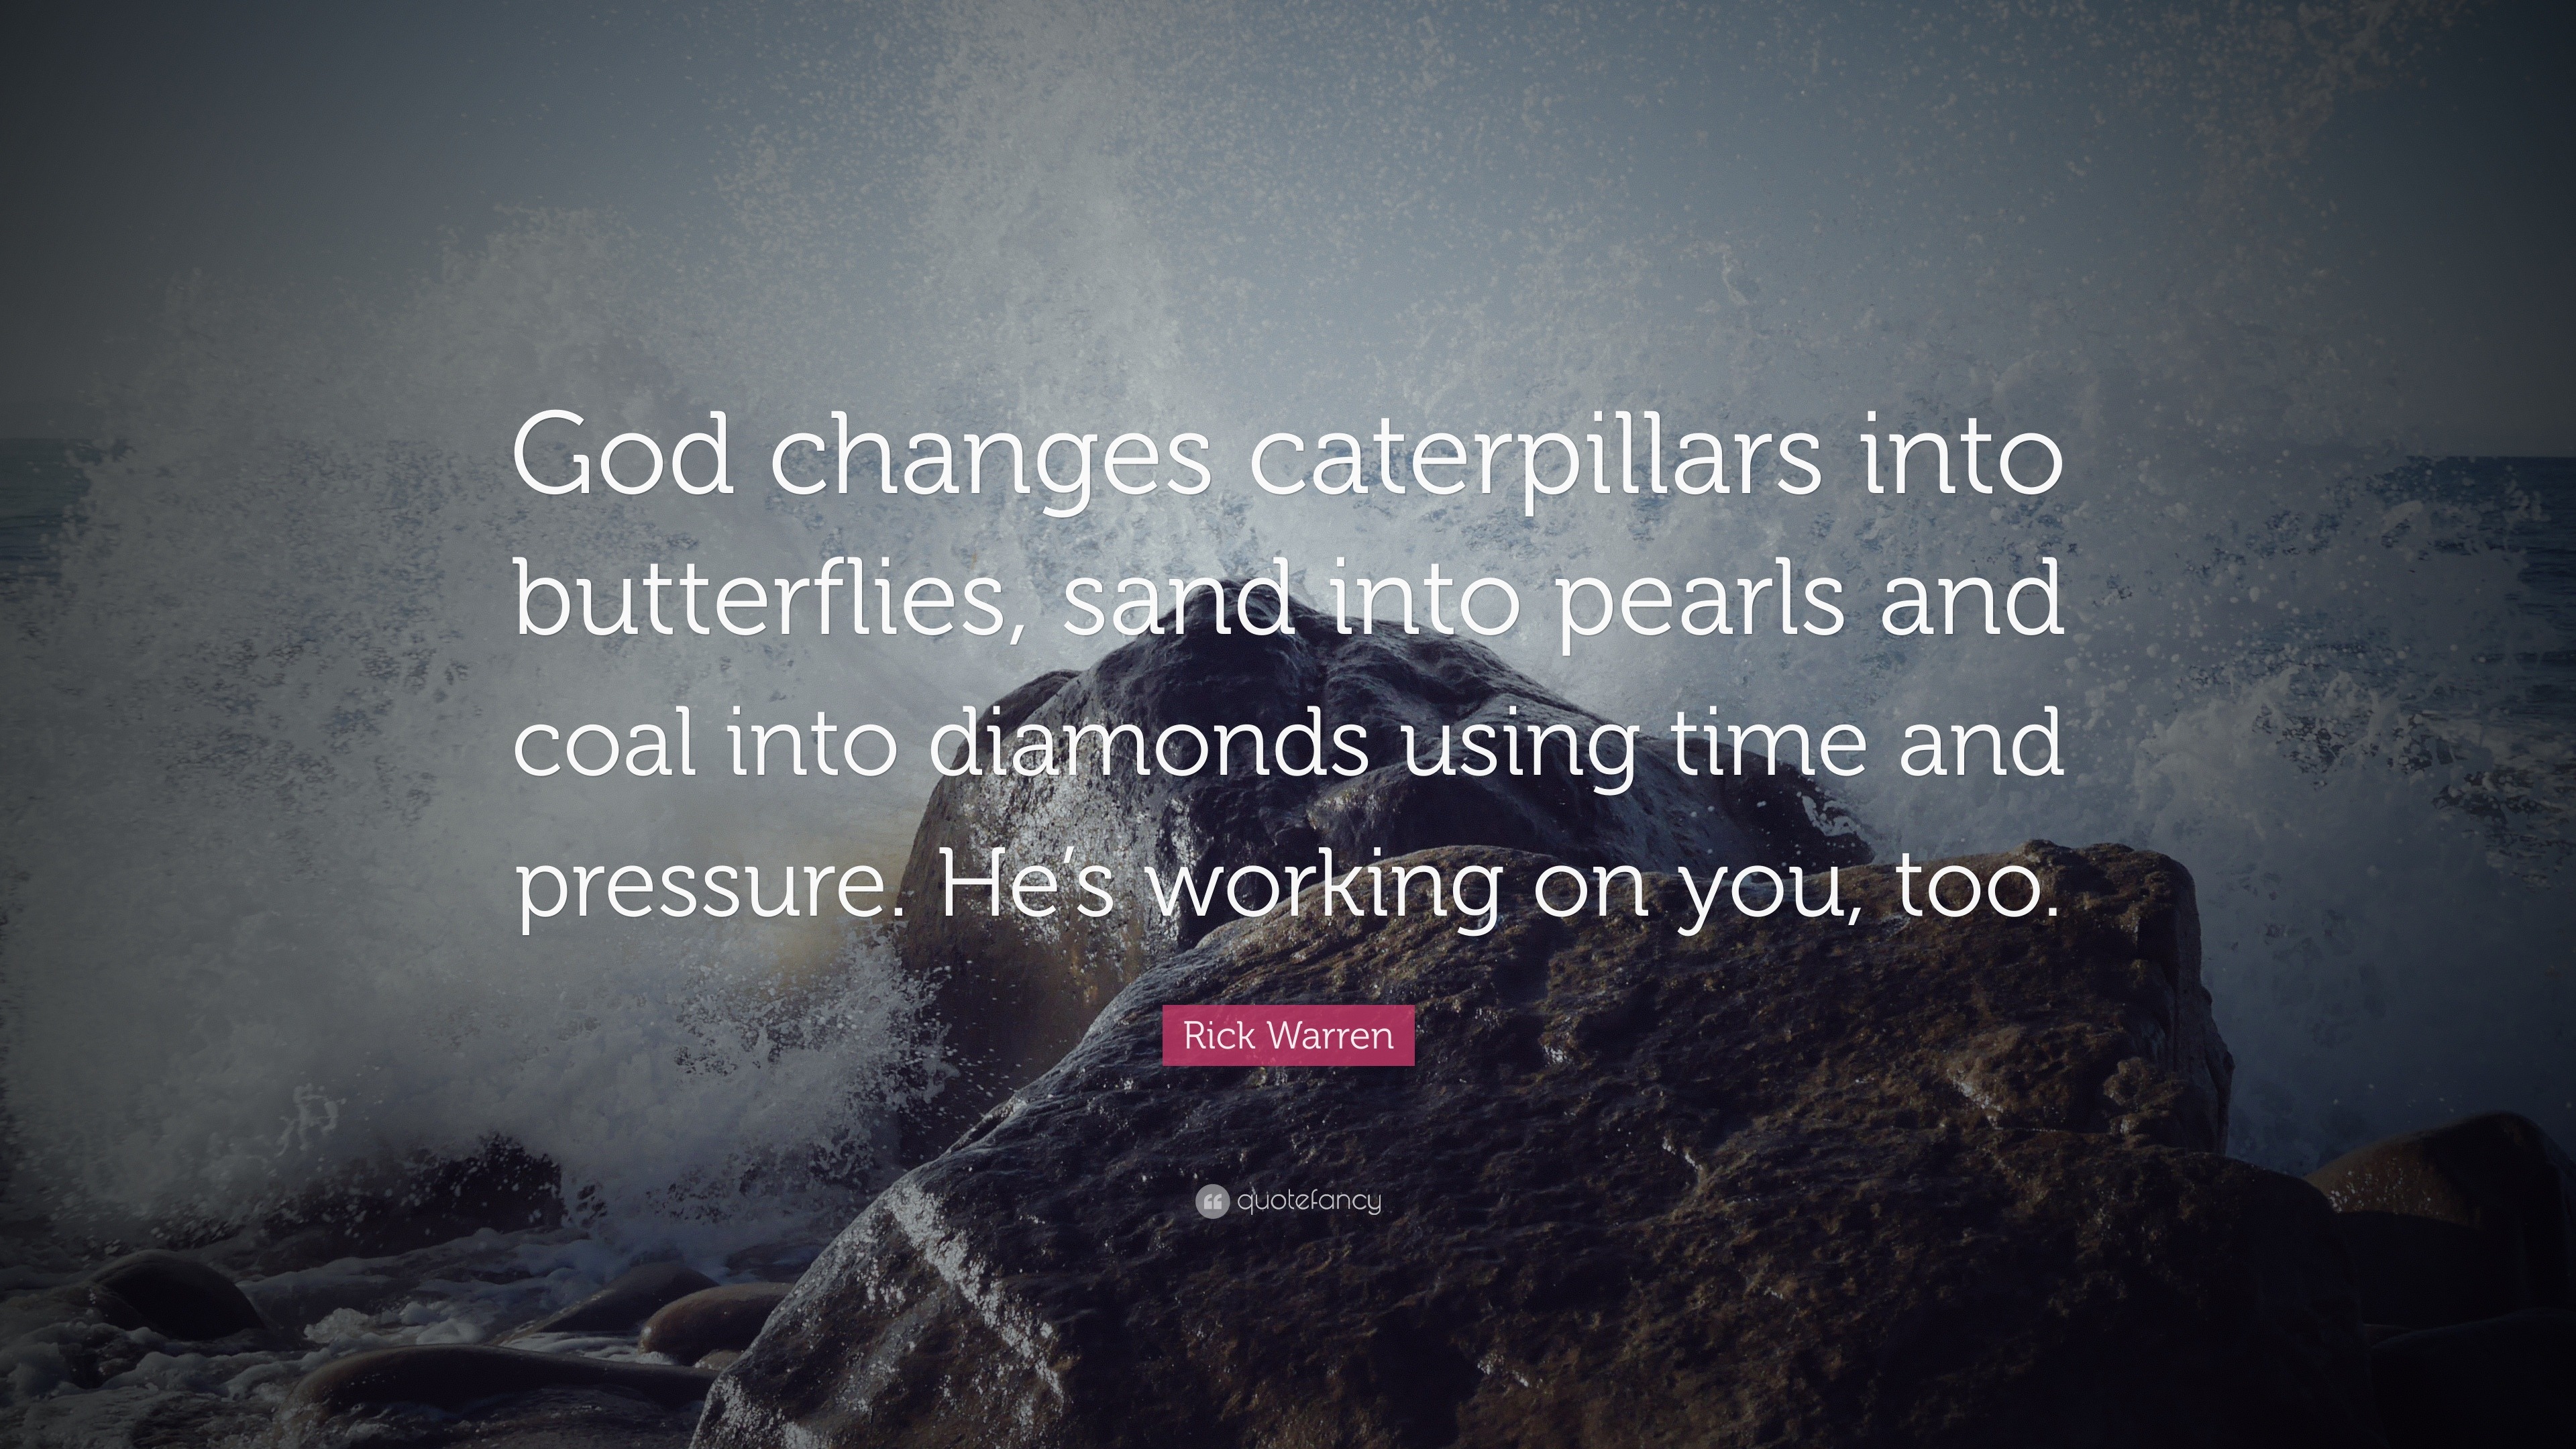 Rick Warren Quote: “God Changes Caterpillars Into Butterflies, Sand Into Pearls And Coal Into Diamonds Using Time And Pressure. He's Working...”